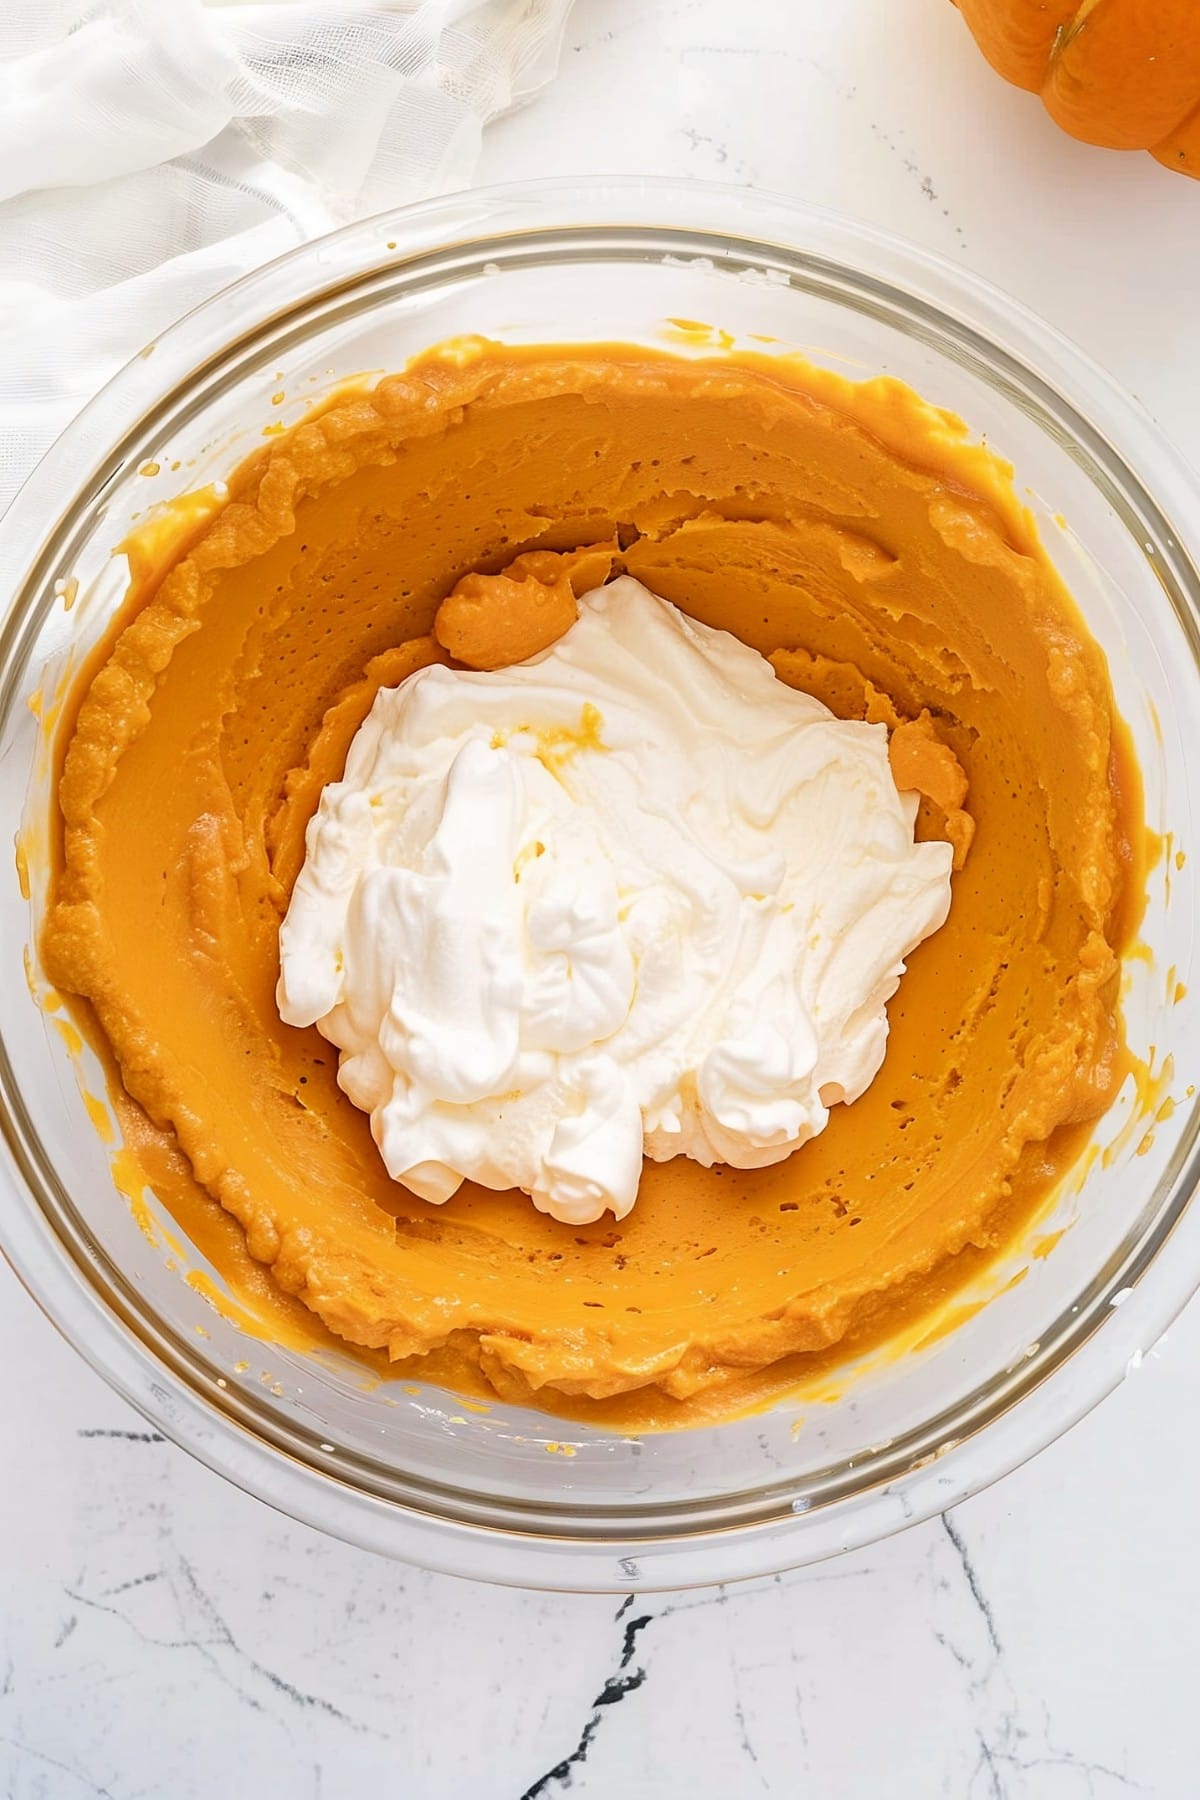 A large glass bowl of pumpkin pudding and whipped cream, overhead view